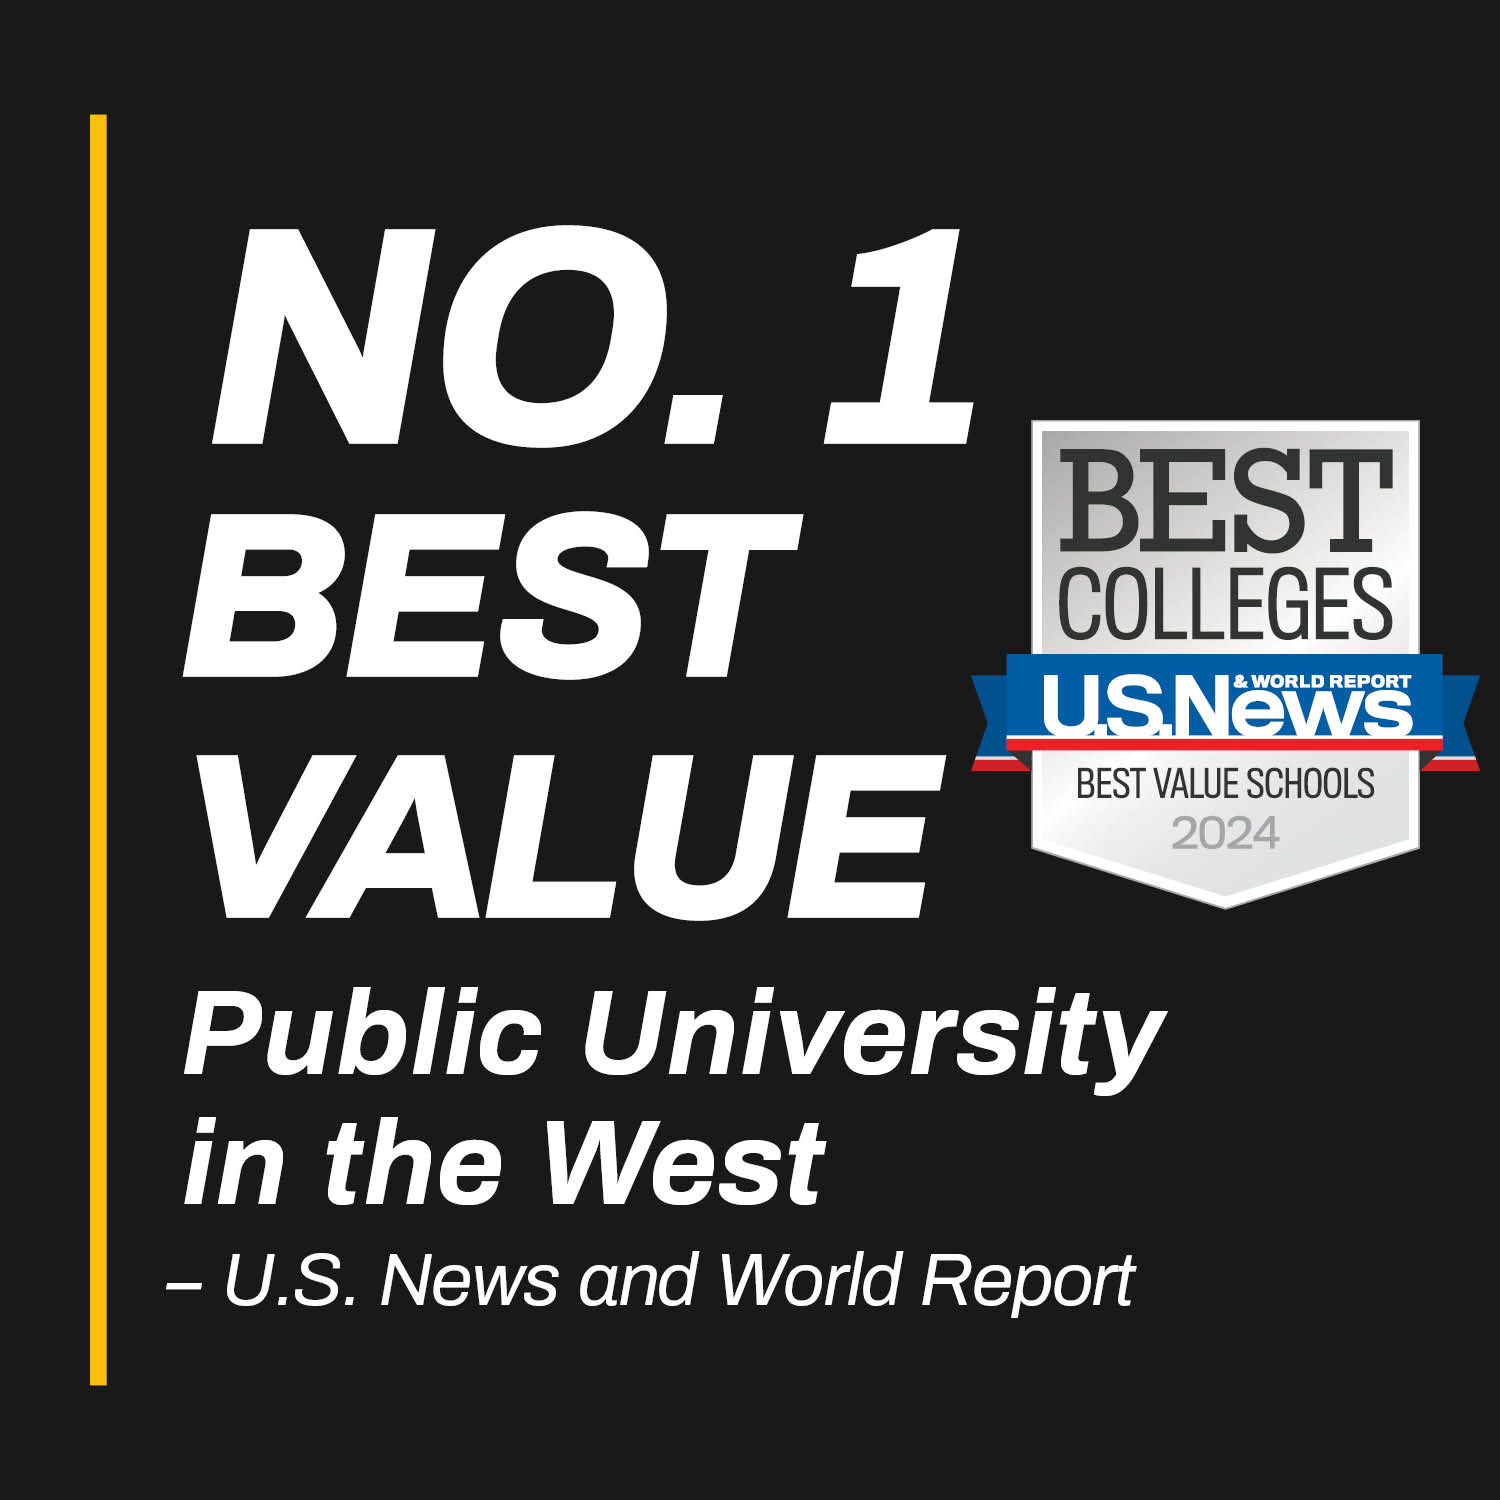 No. 1 Best Value Public University in the West - U.S. News and World Report